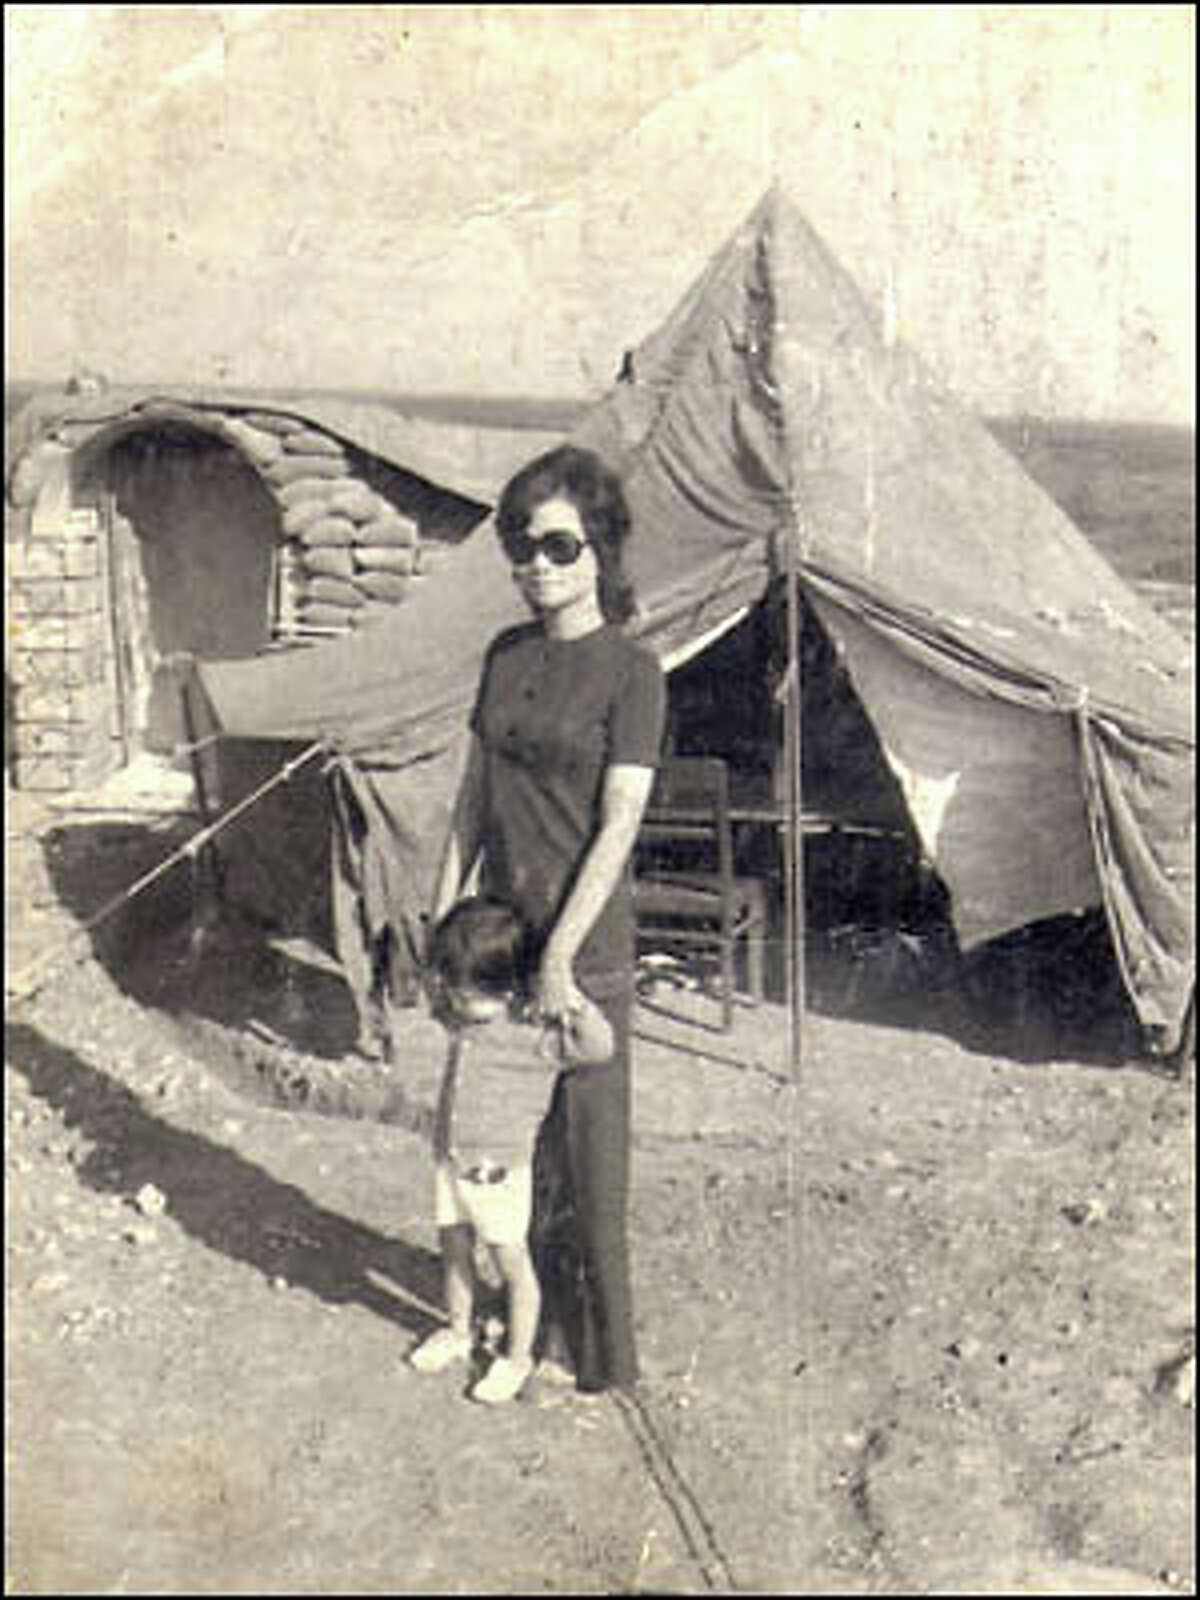 Sen often brought her children to see their father, Me, while he was stationed at army bases during the war. During one break in the fighting in 1972, Sen took 1-1/2-year-old Quyen to the Quang Tri Province.